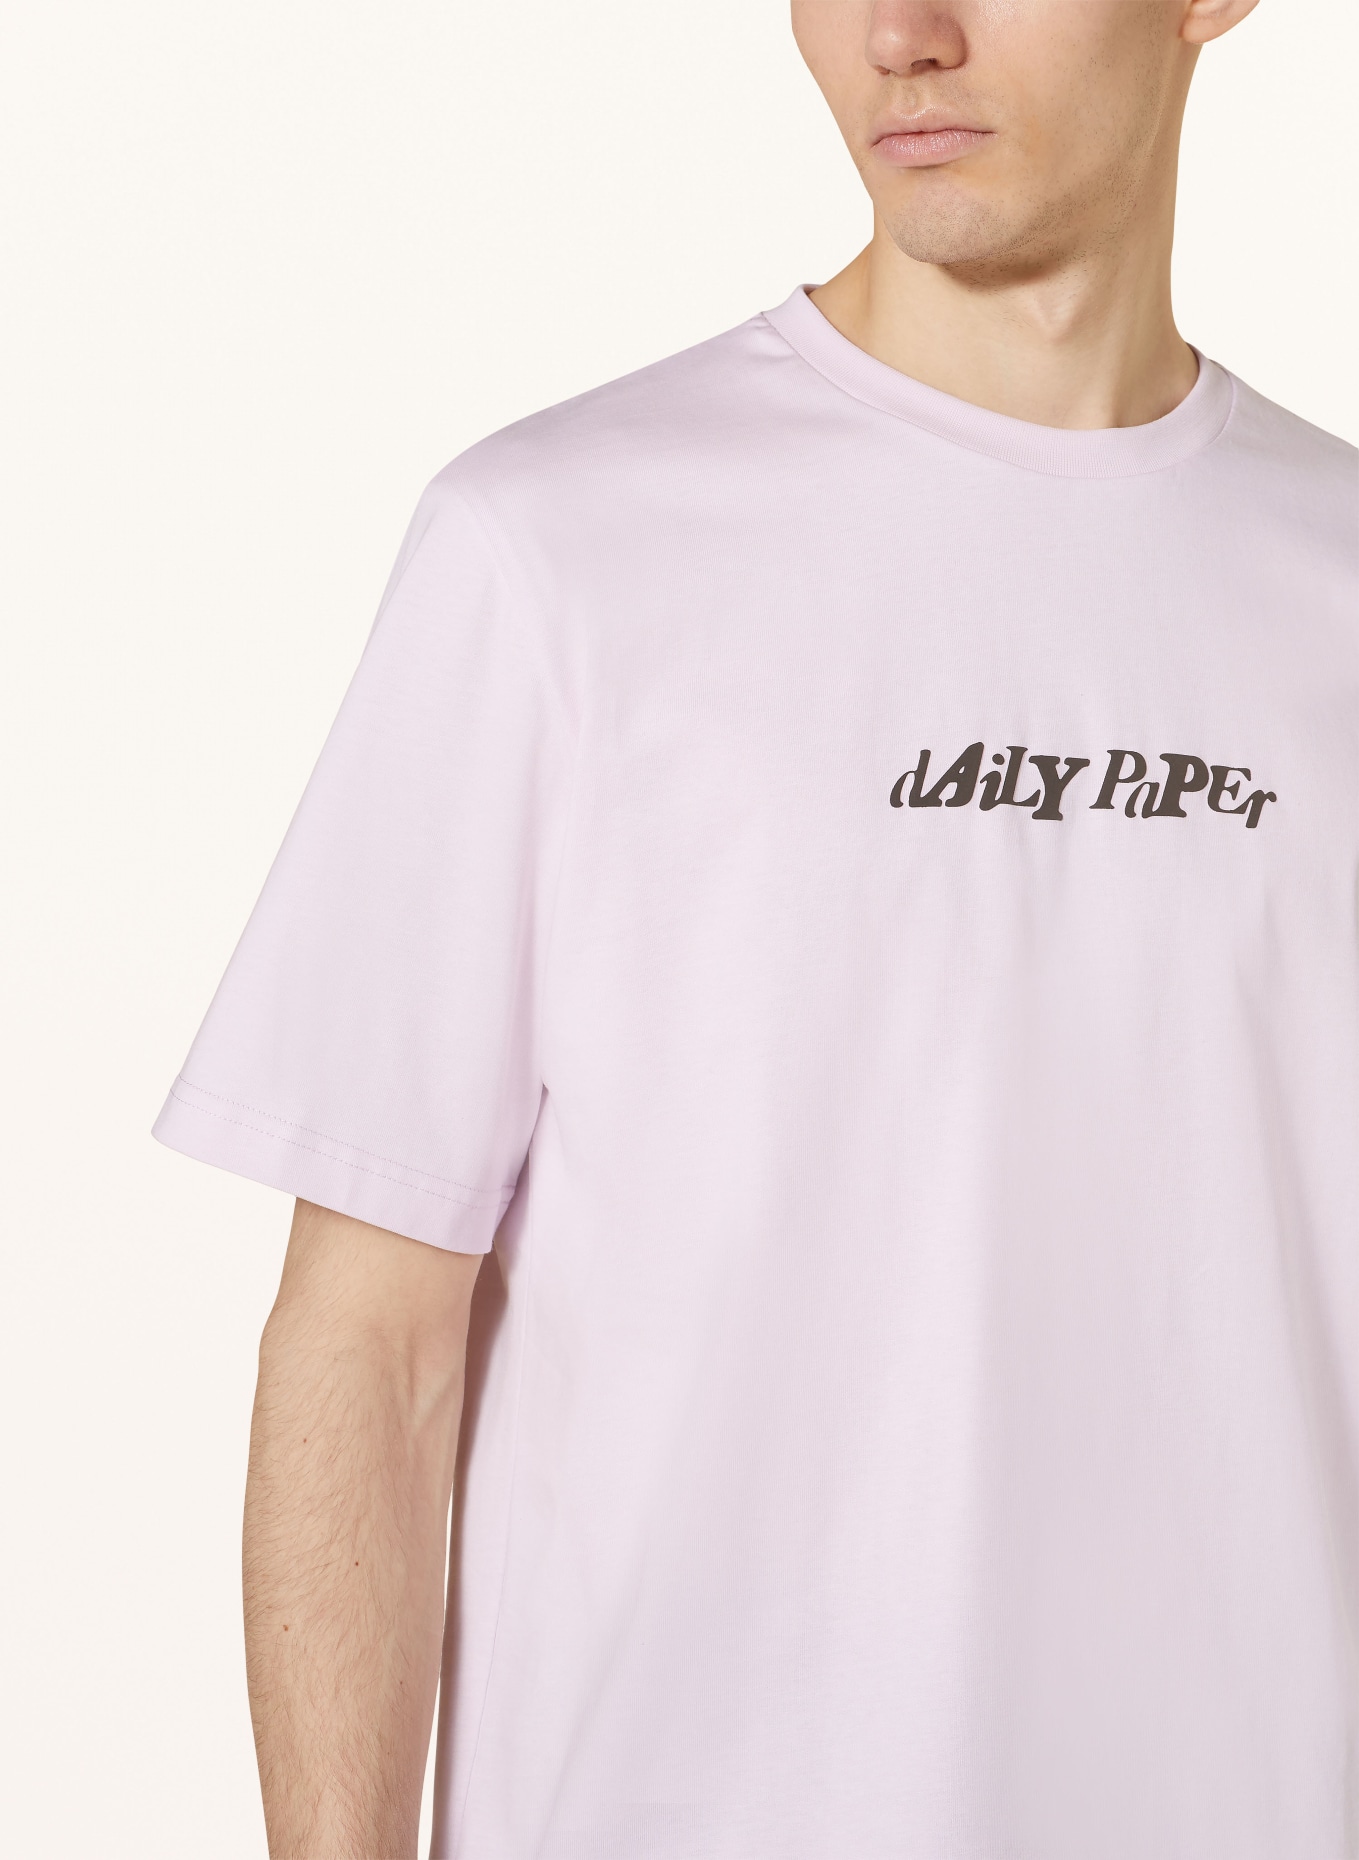 DAILY PAPER T-shirt, Color: LIGHT PINK (Image 4)